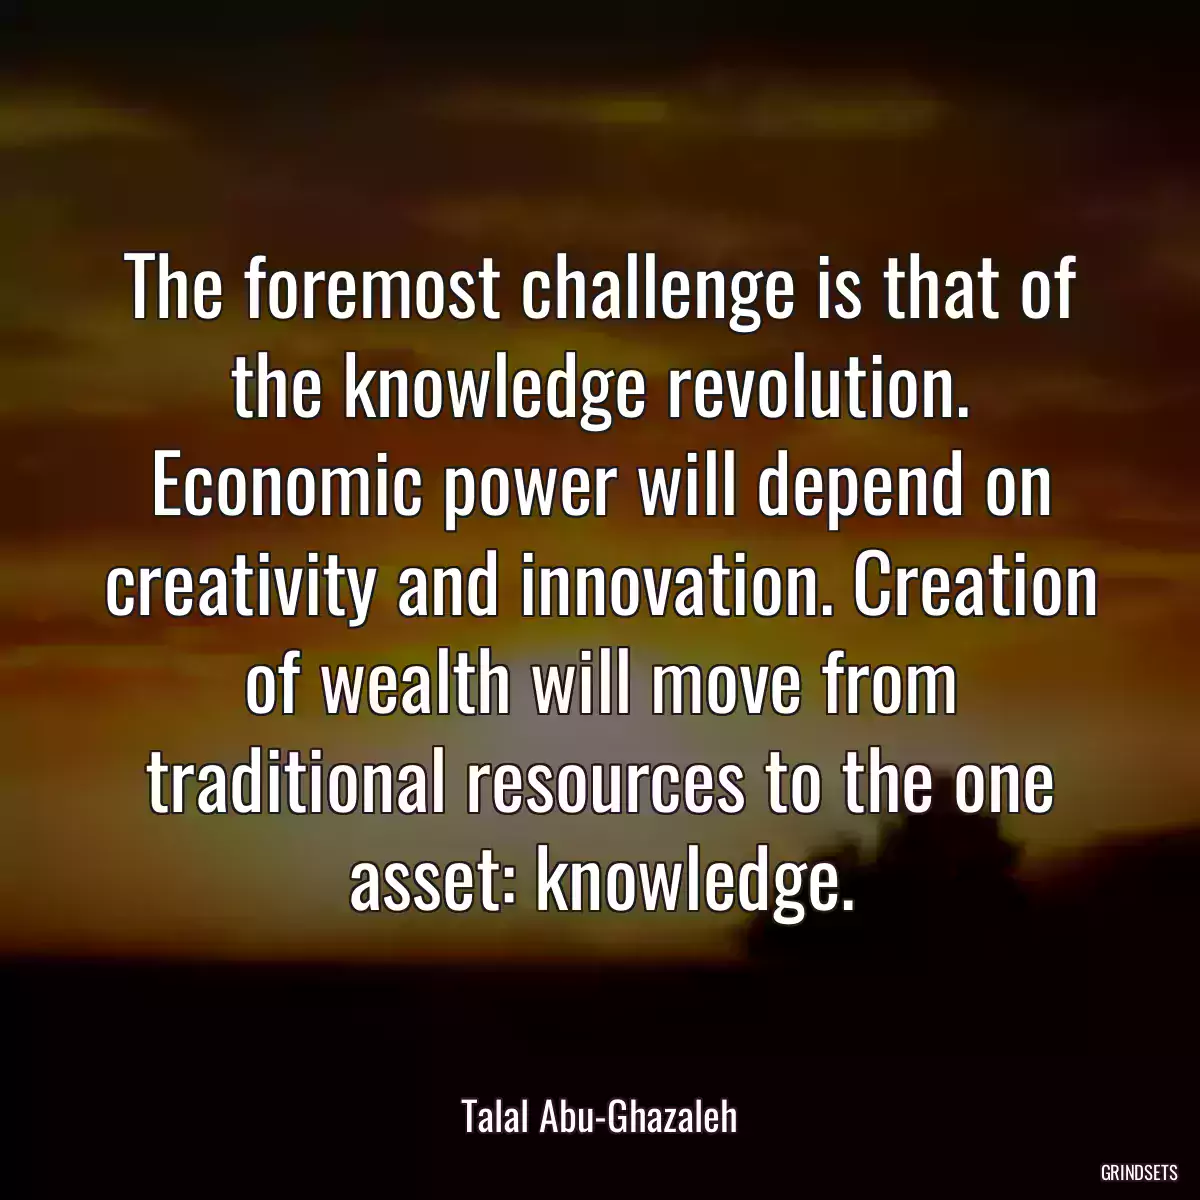 The foremost challenge is that of the knowledge revolution. Economic power will depend on creativity and innovation. Creation of wealth will move from traditional resources to the one asset: knowledge.